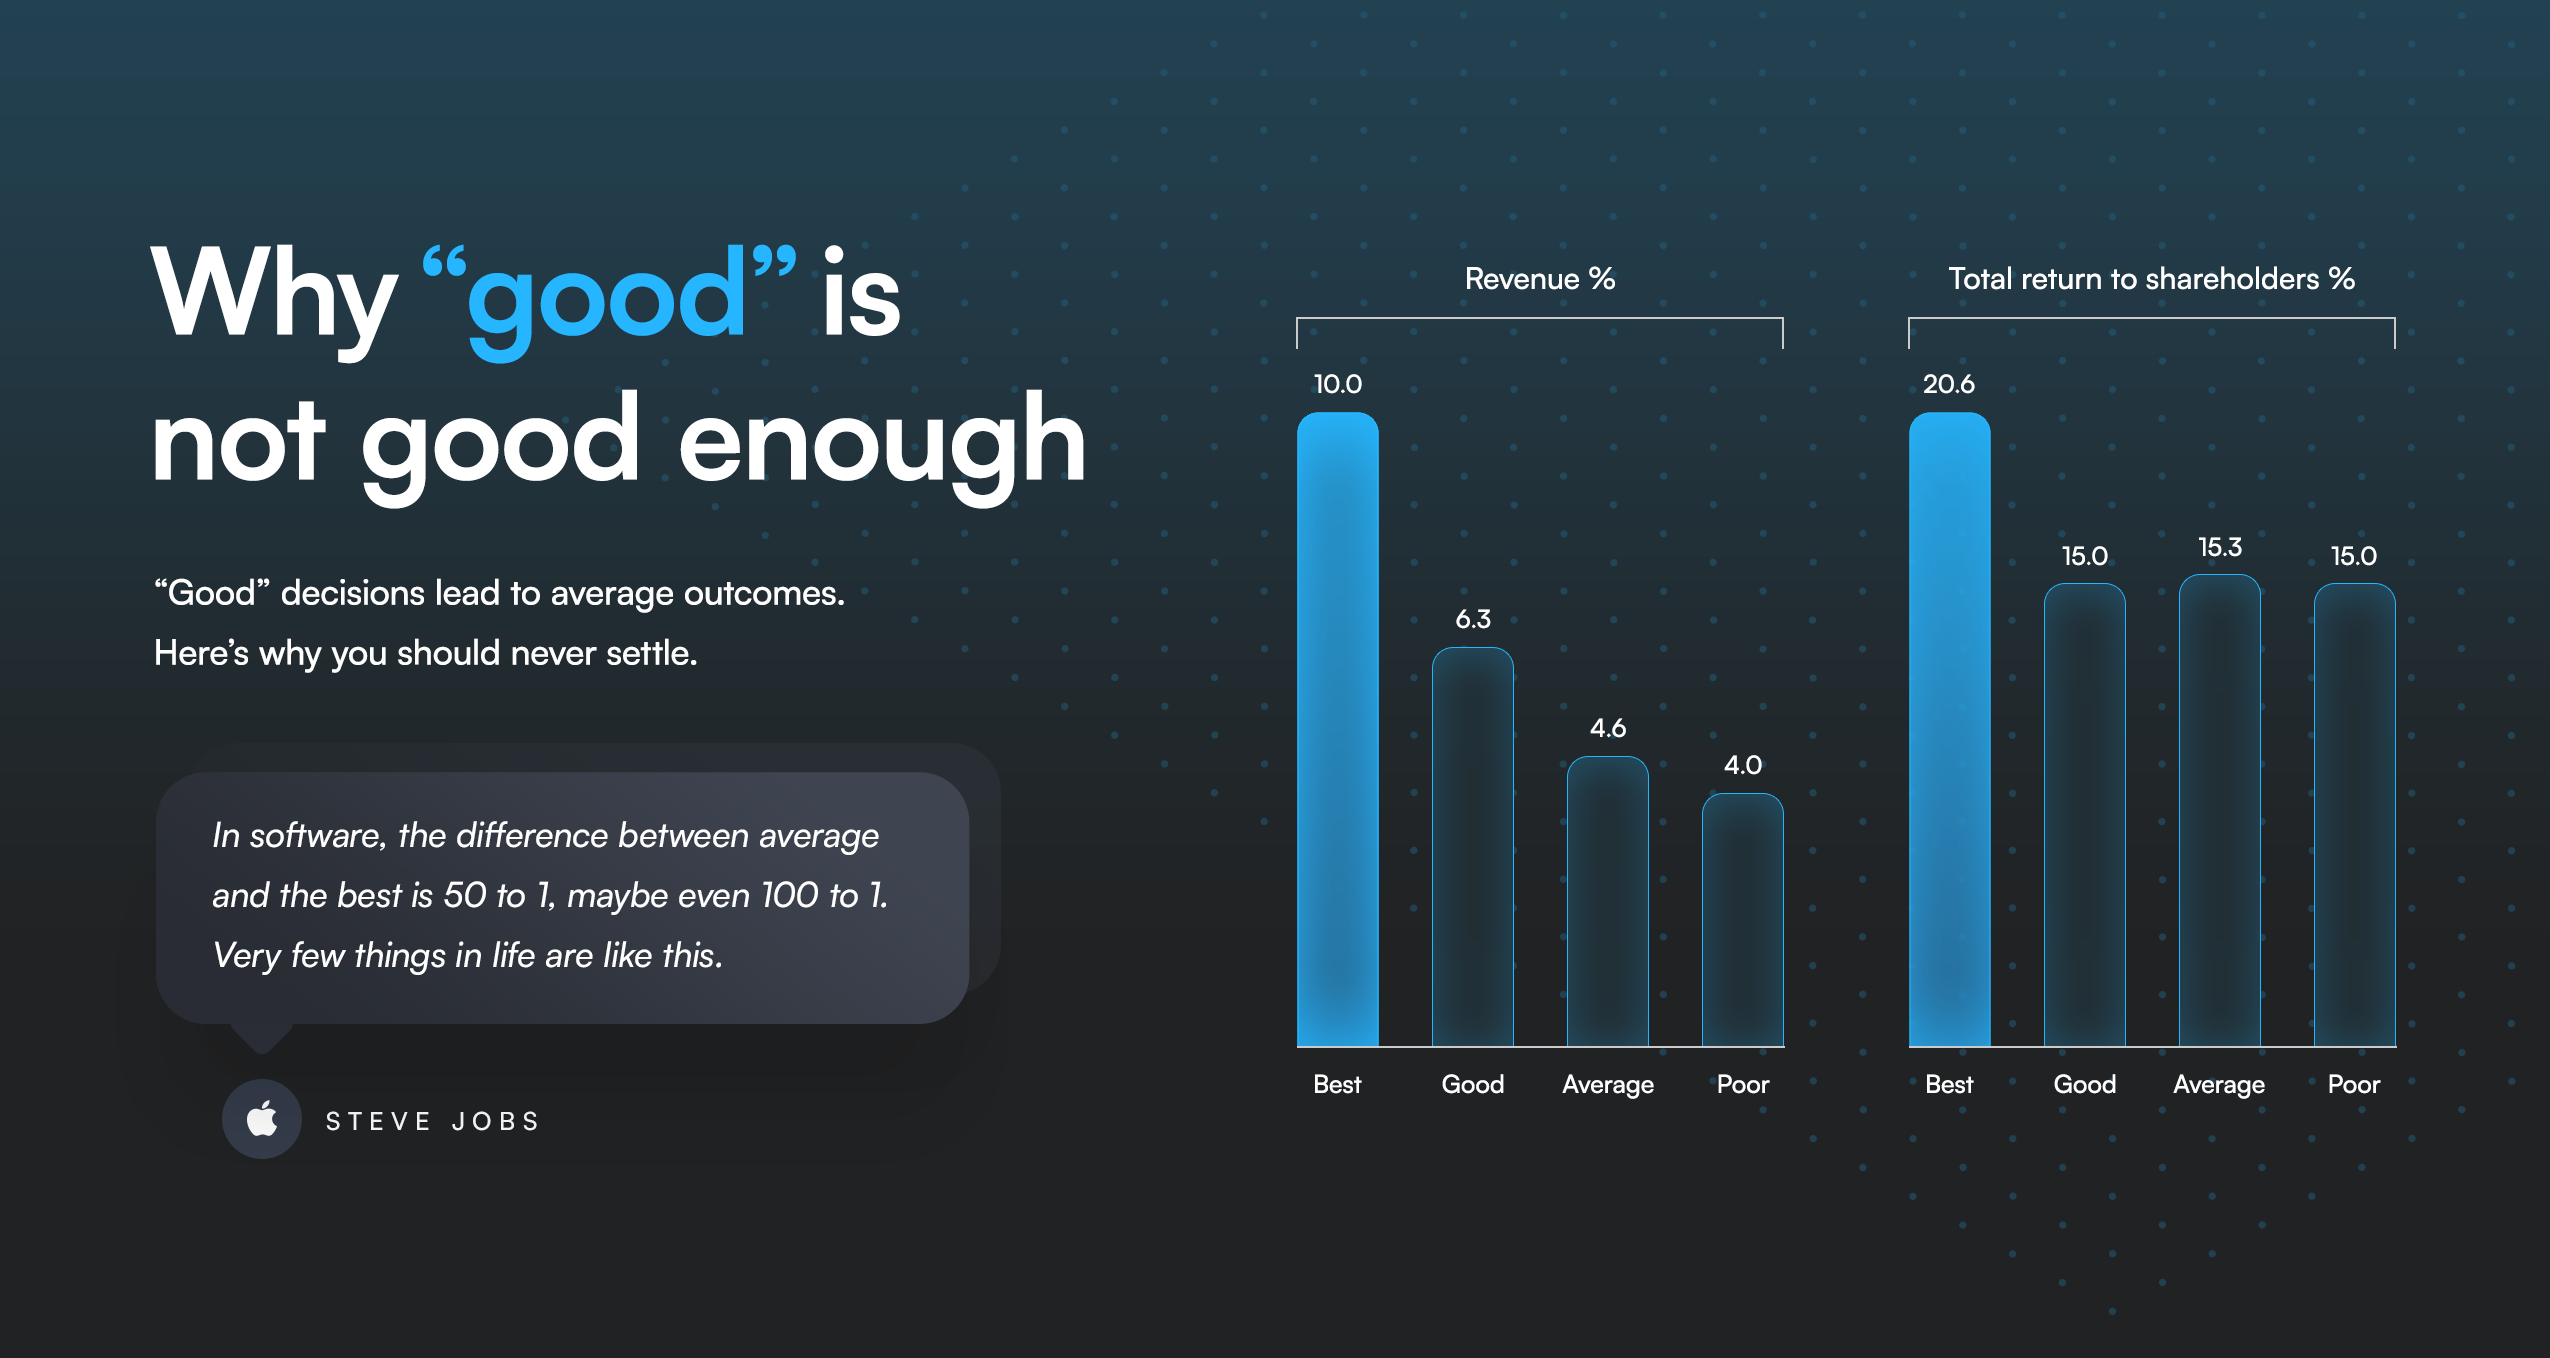 Why “good” is not good enough